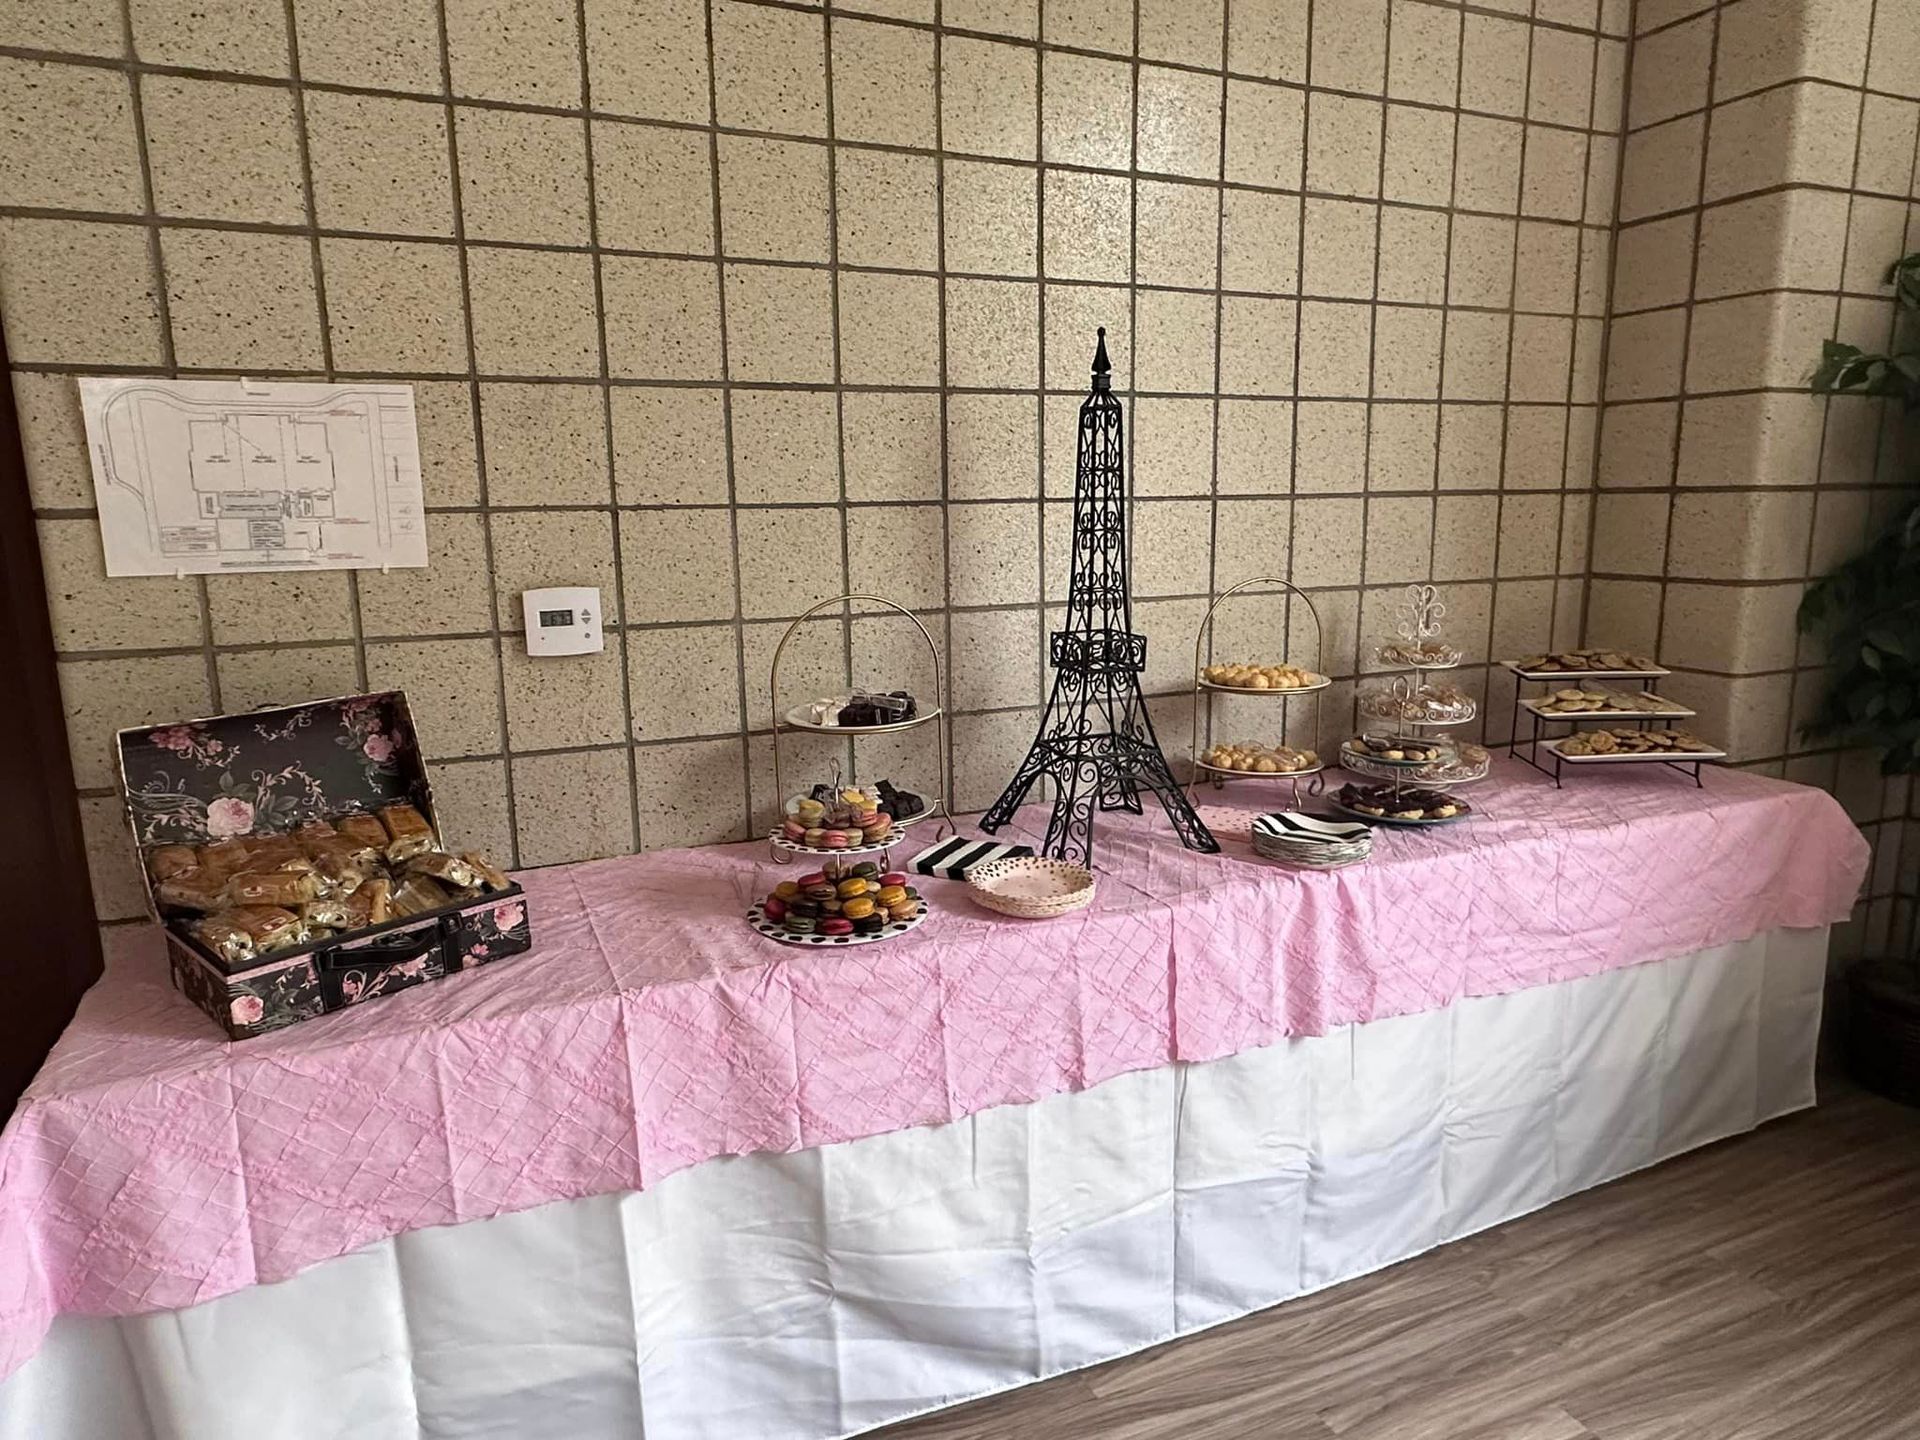 An array of cookies and other sweets on a pink tablecloth.